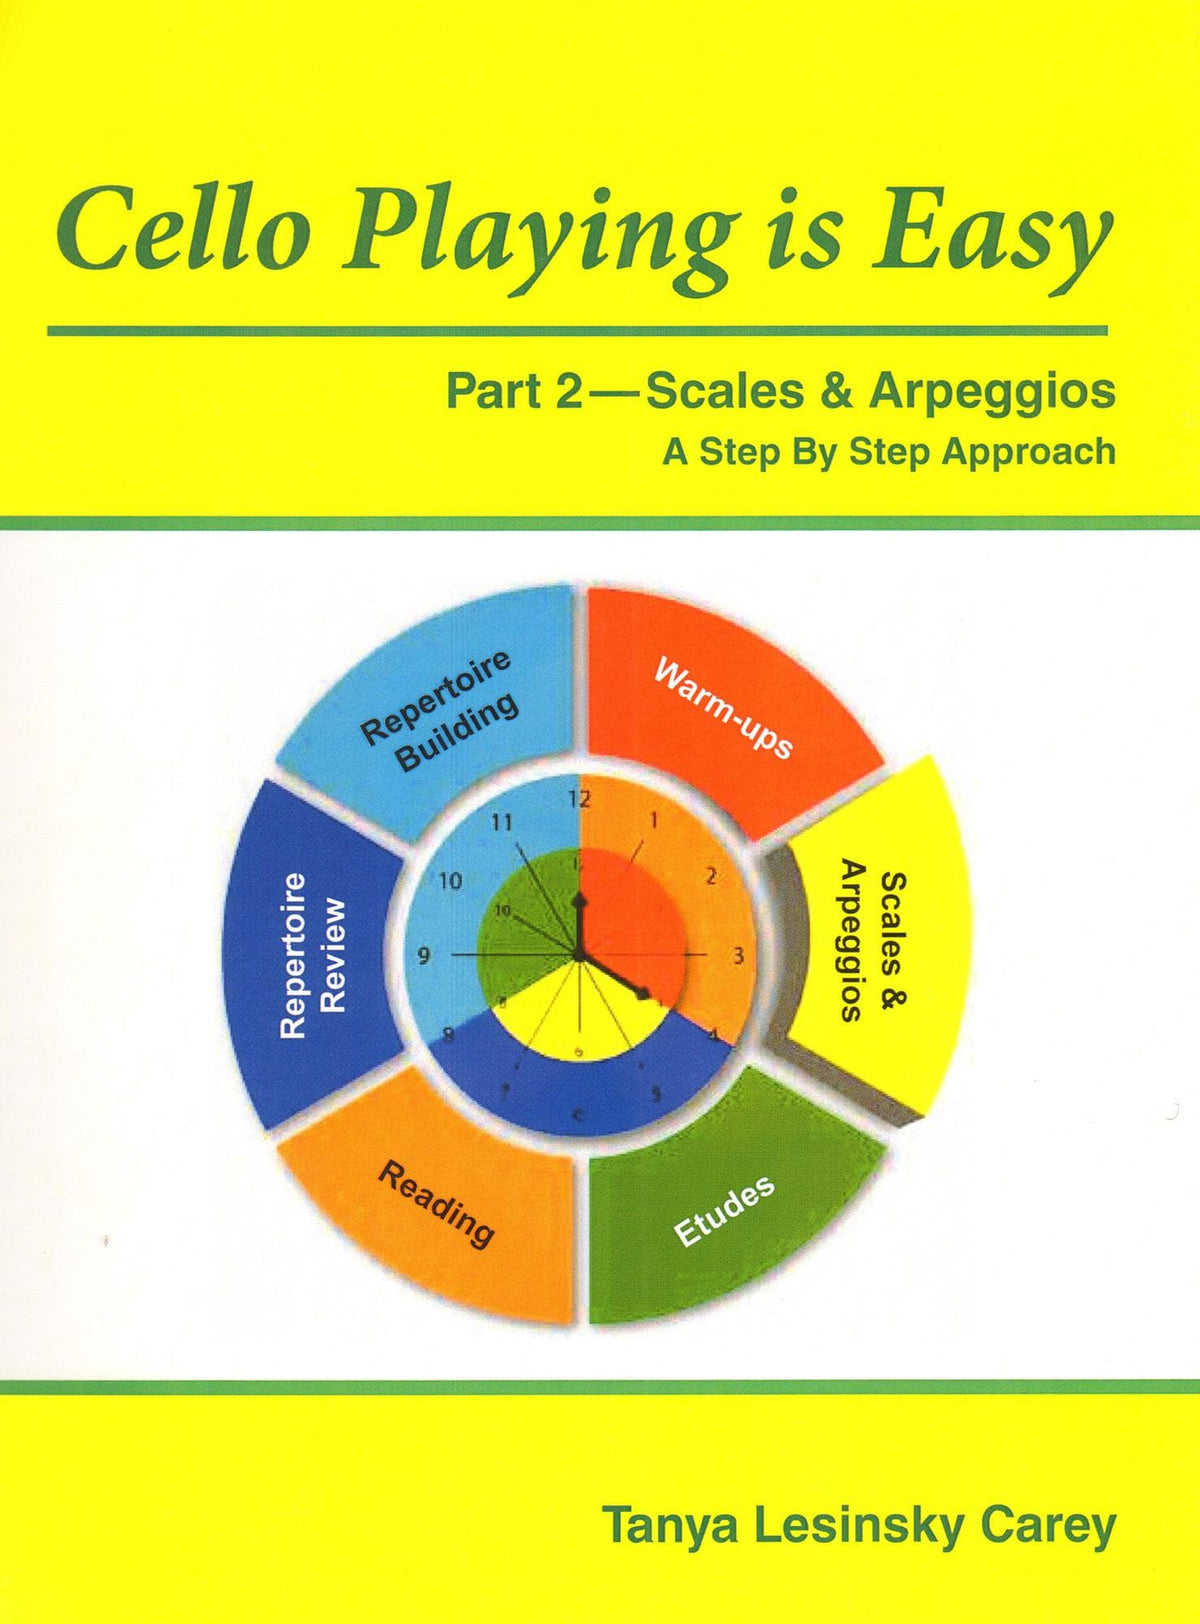 Cello Playing Is Easy Part 2: Scales & Arpeggios